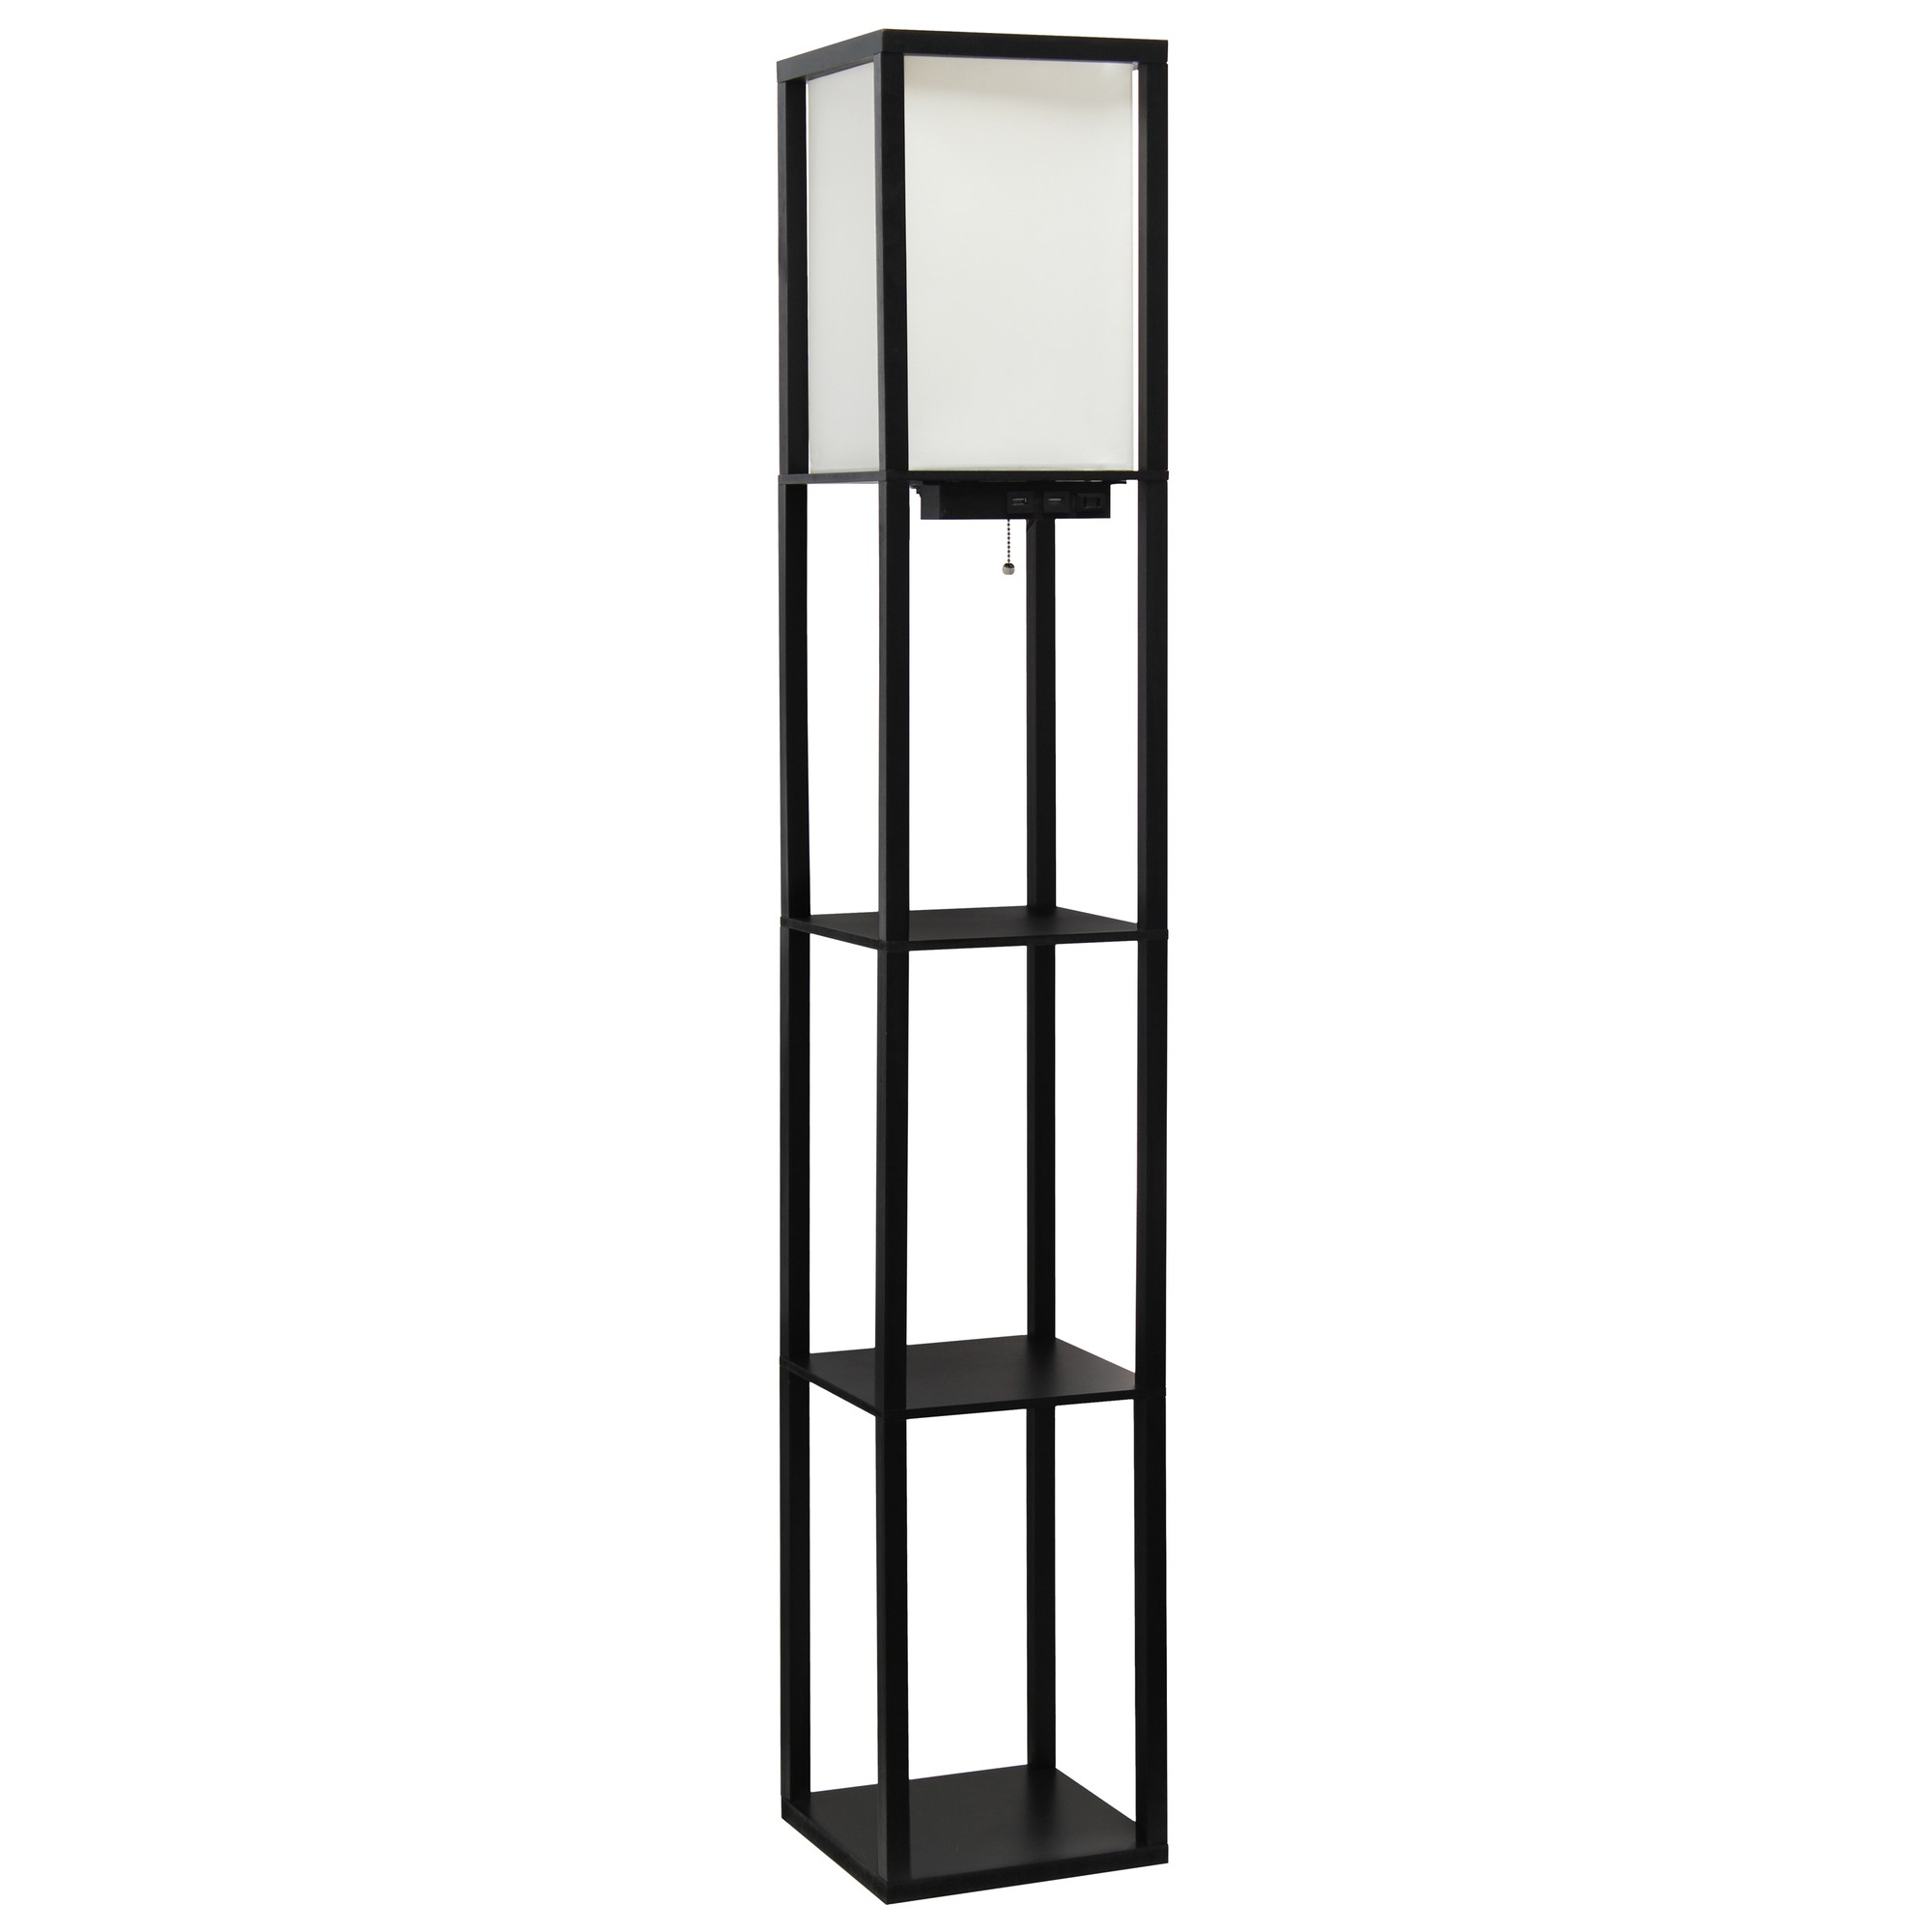 Simple Designs Floor Lamp Etagere Organizer Storage Shelf with 2 USB Charging Ports, 1 Charging Outlet and Linen Shade, Black